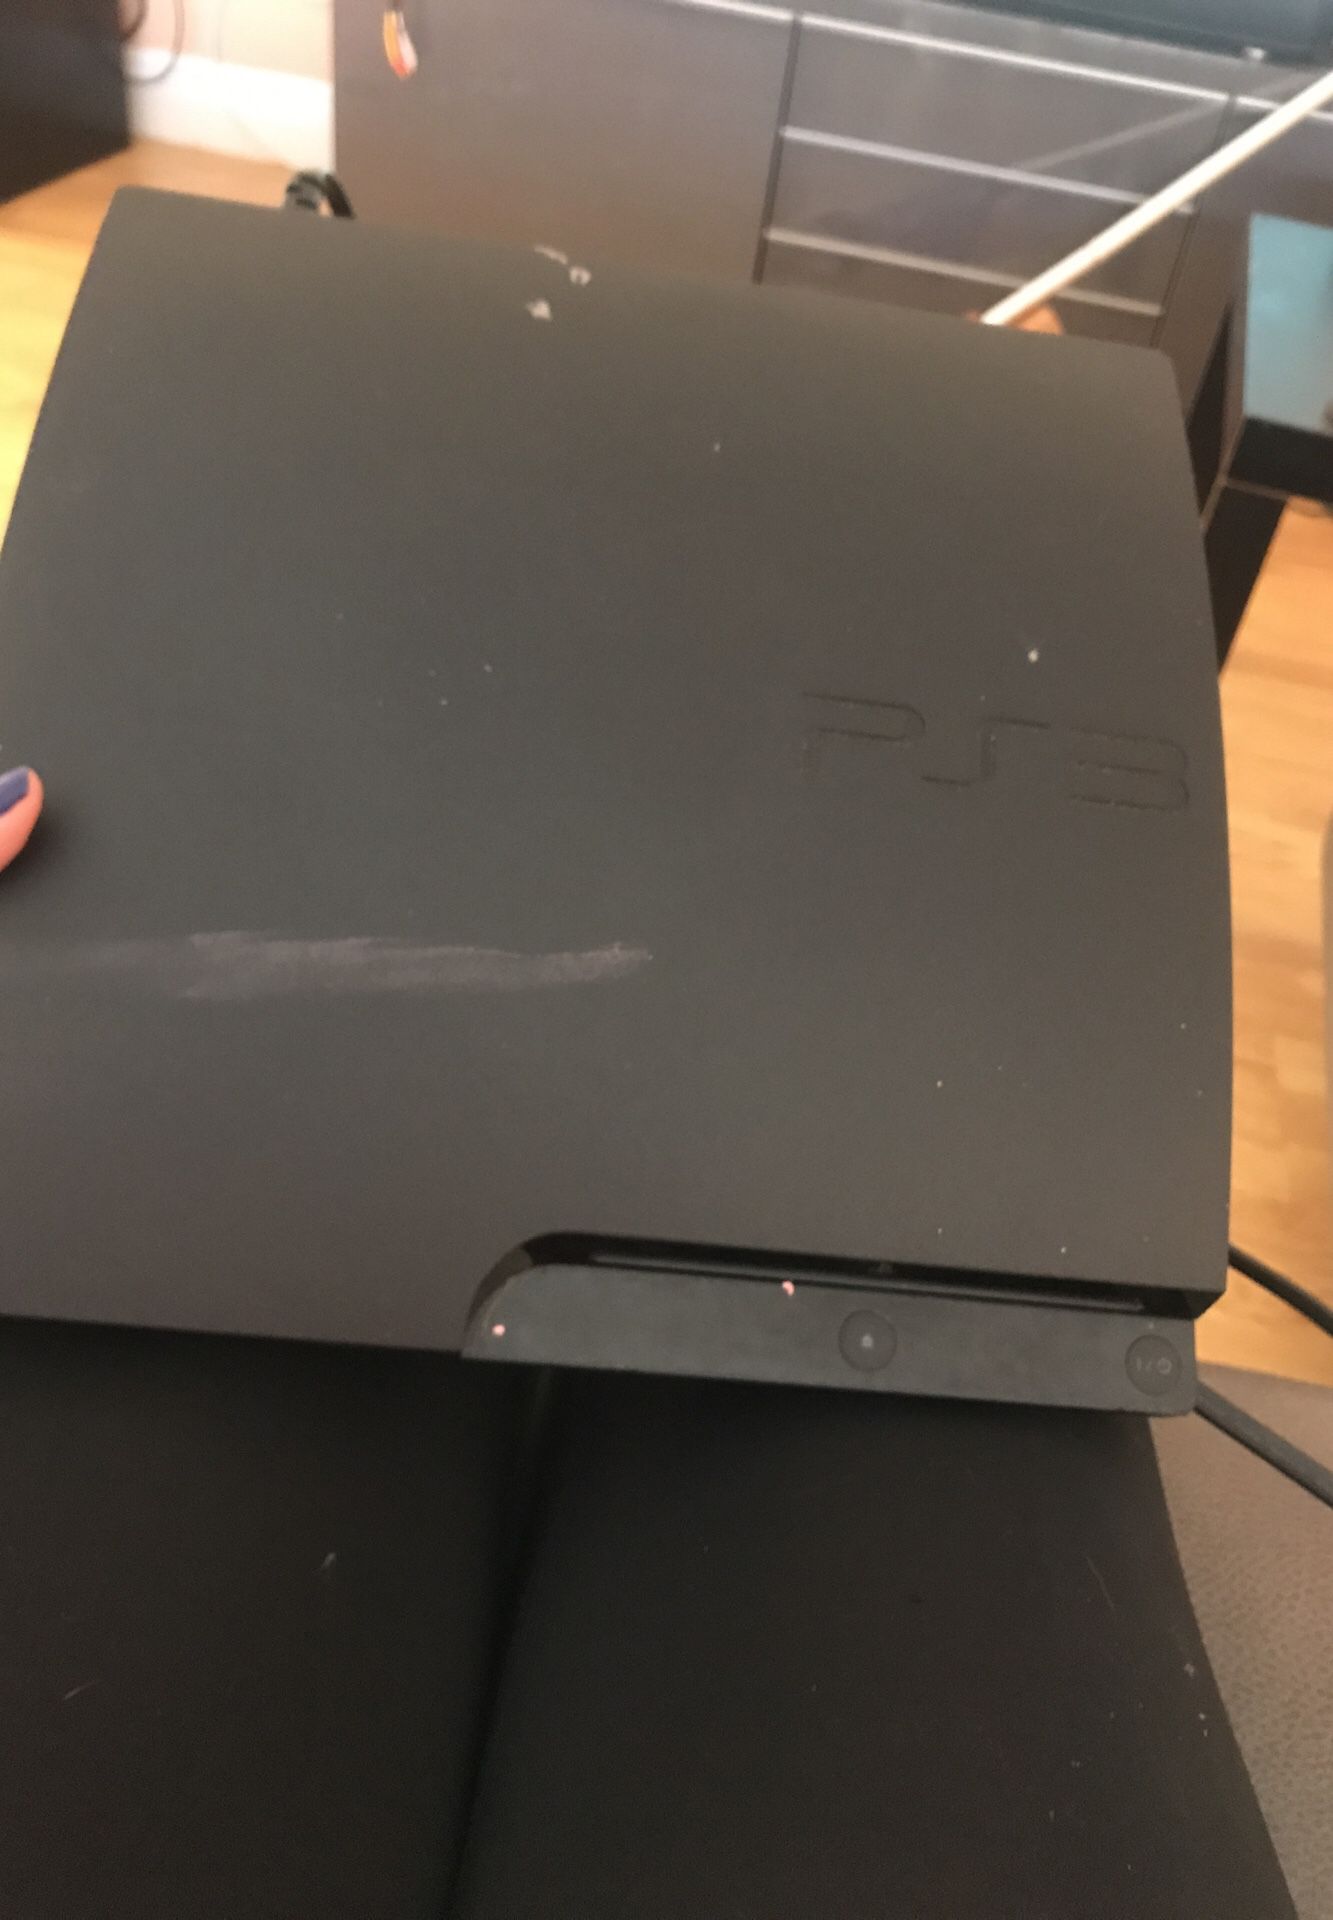 Used PlayStation 3 missing HDMI and controls